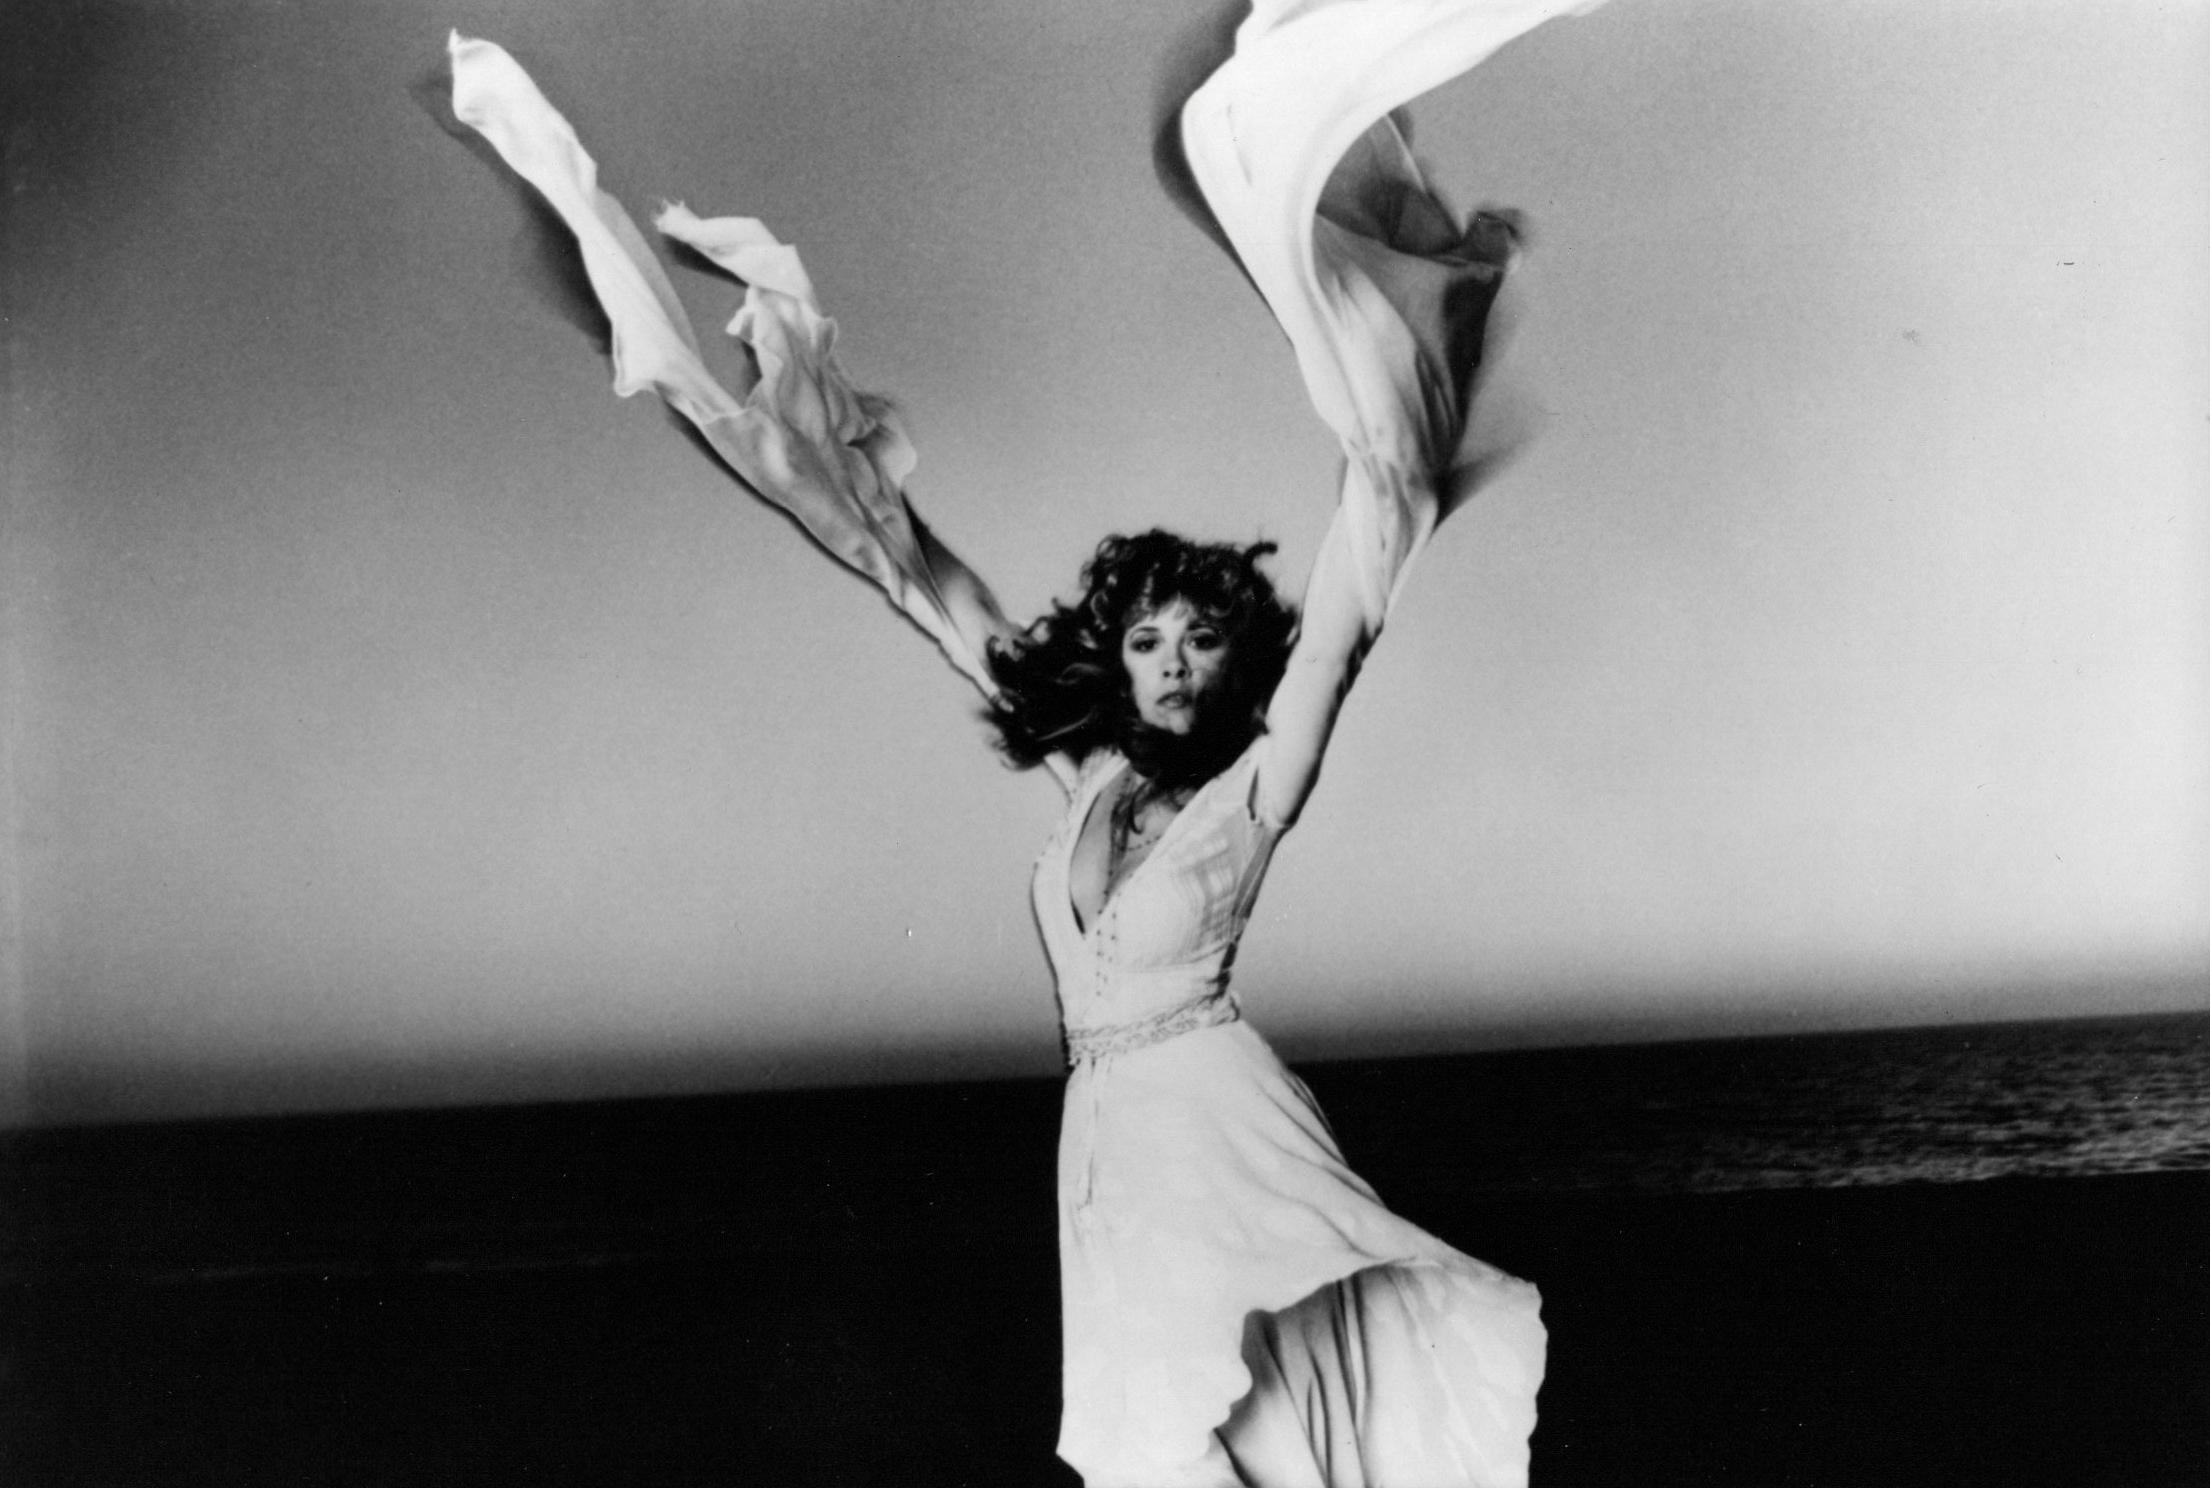 Neal Preston Portrait Photograph - Stevie Nicks Posing with Arms Outstretched Vintage Original Photograph